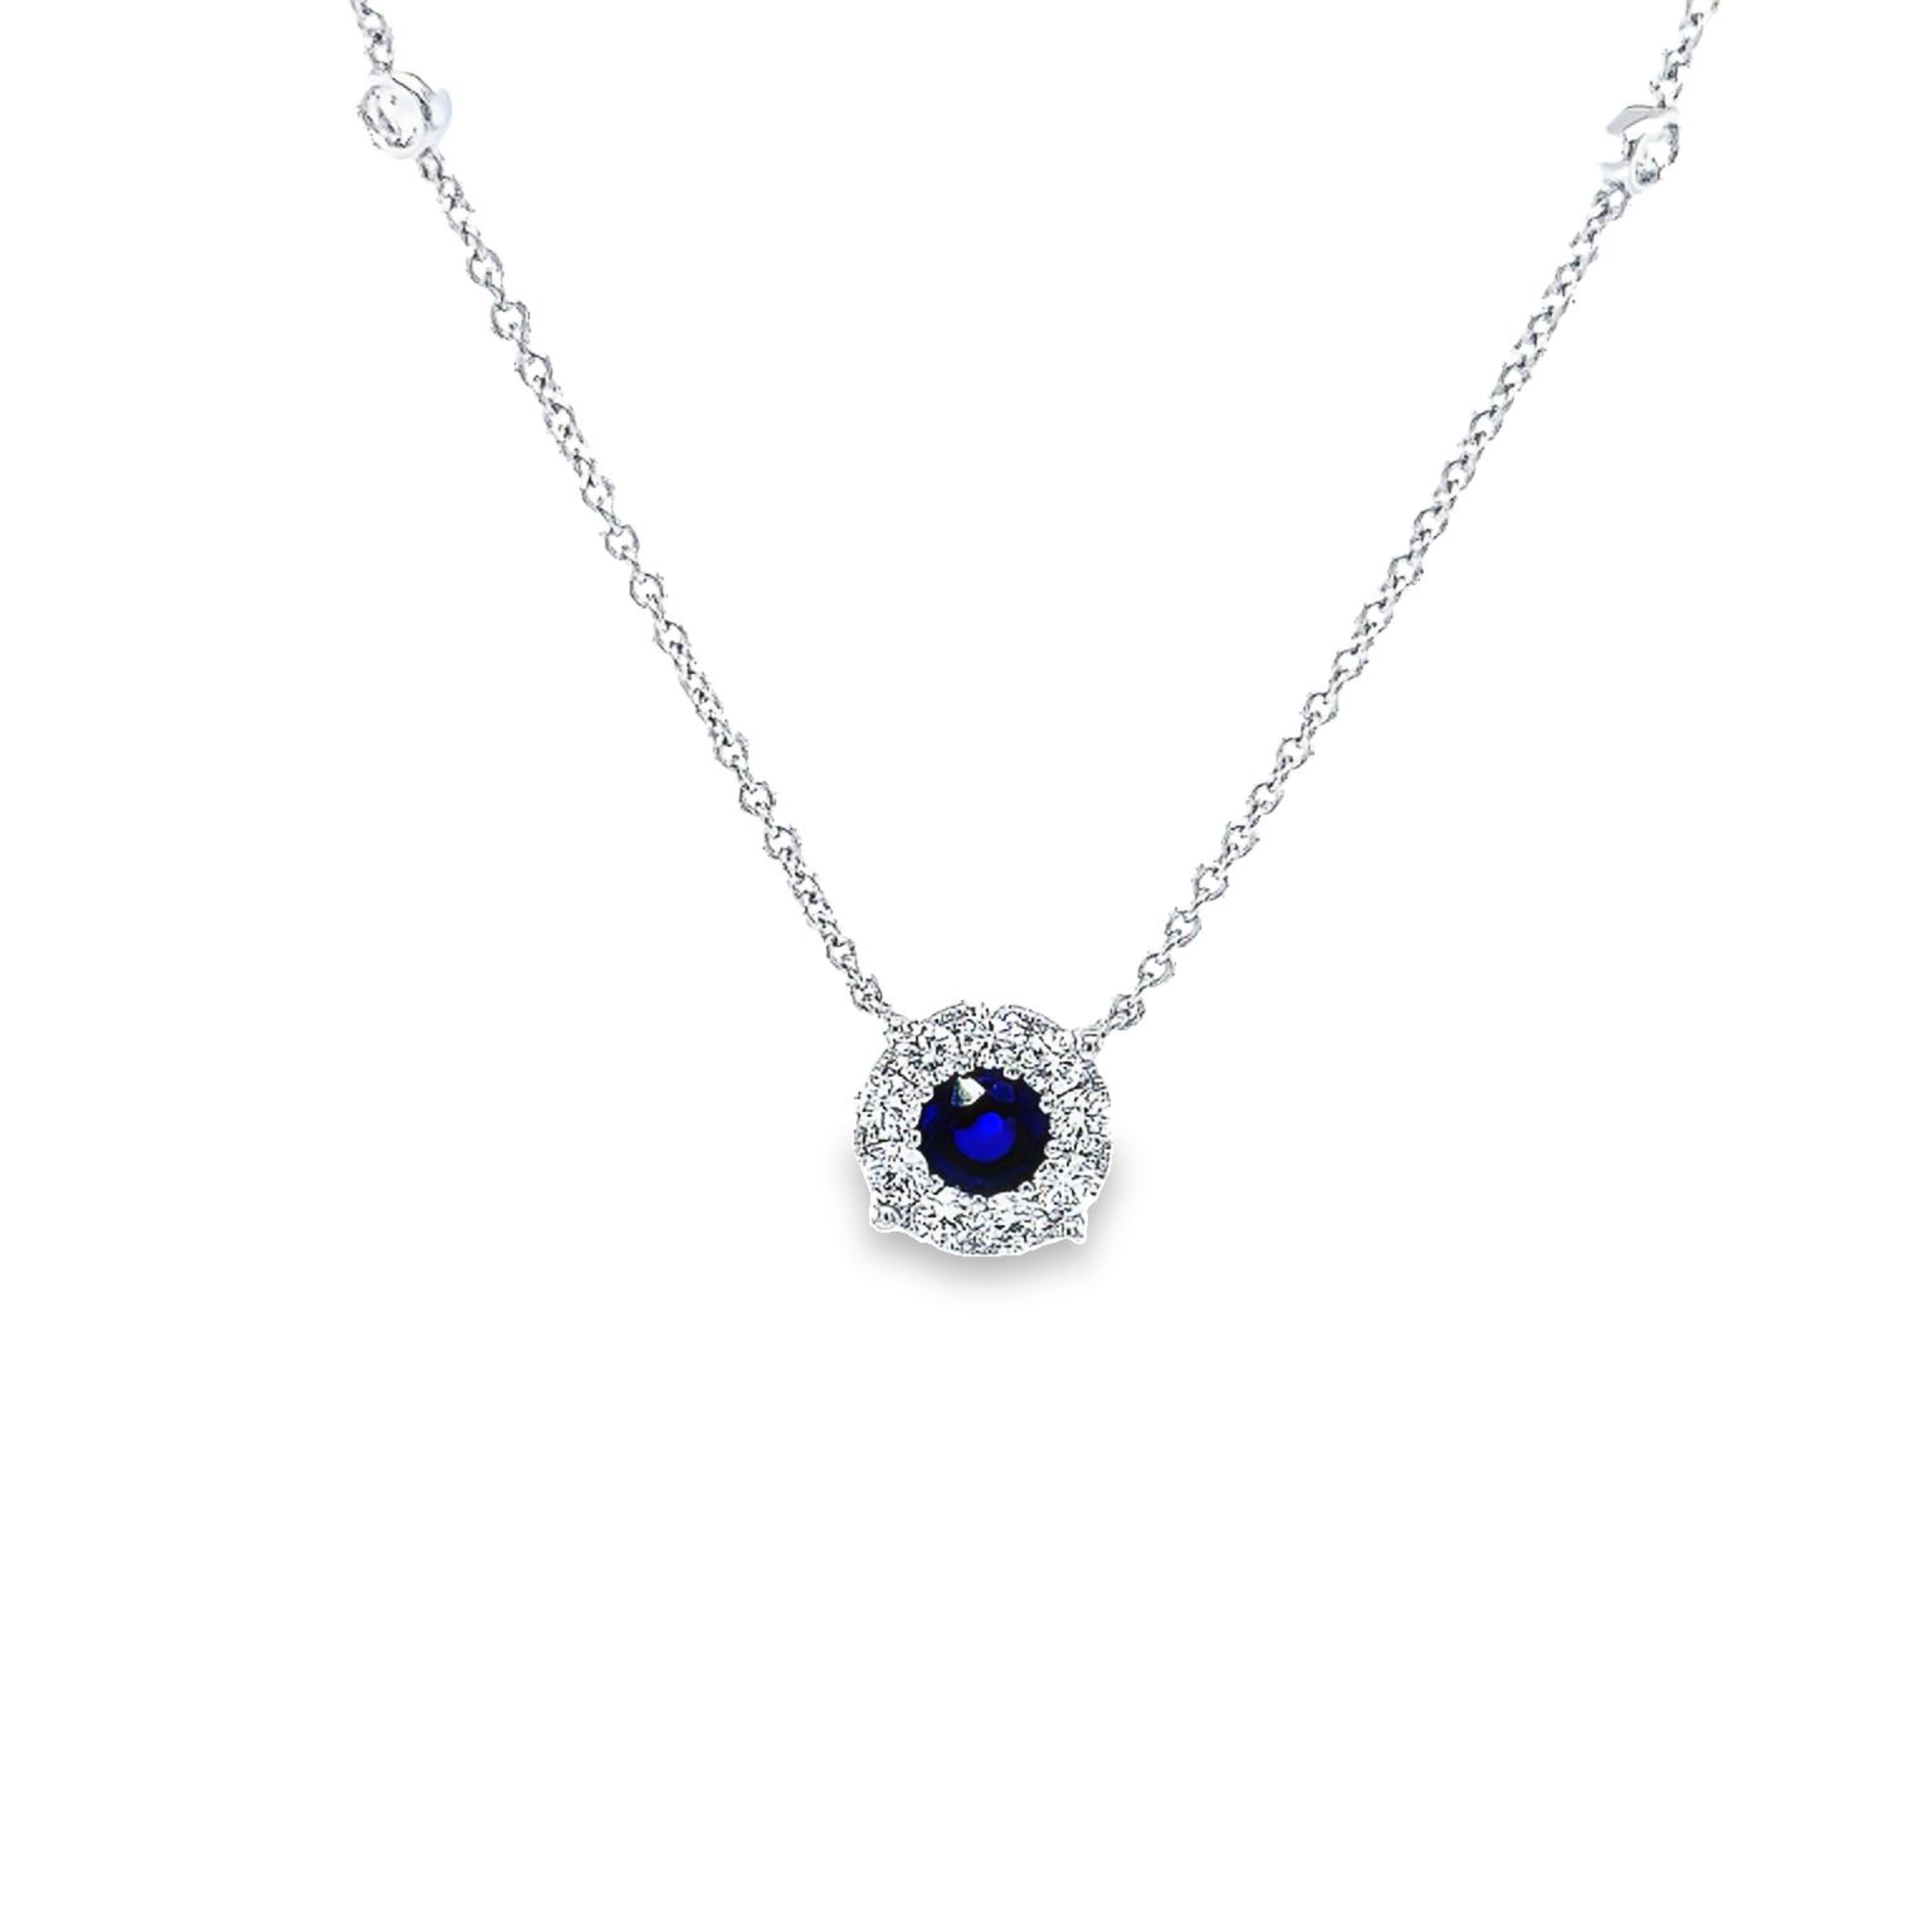 14 Karat white gold halo solitaire necklace with one 0.58 twt round mixed cut Sapphire and 13=0.44 total weight round brilliant G VS Diamonds